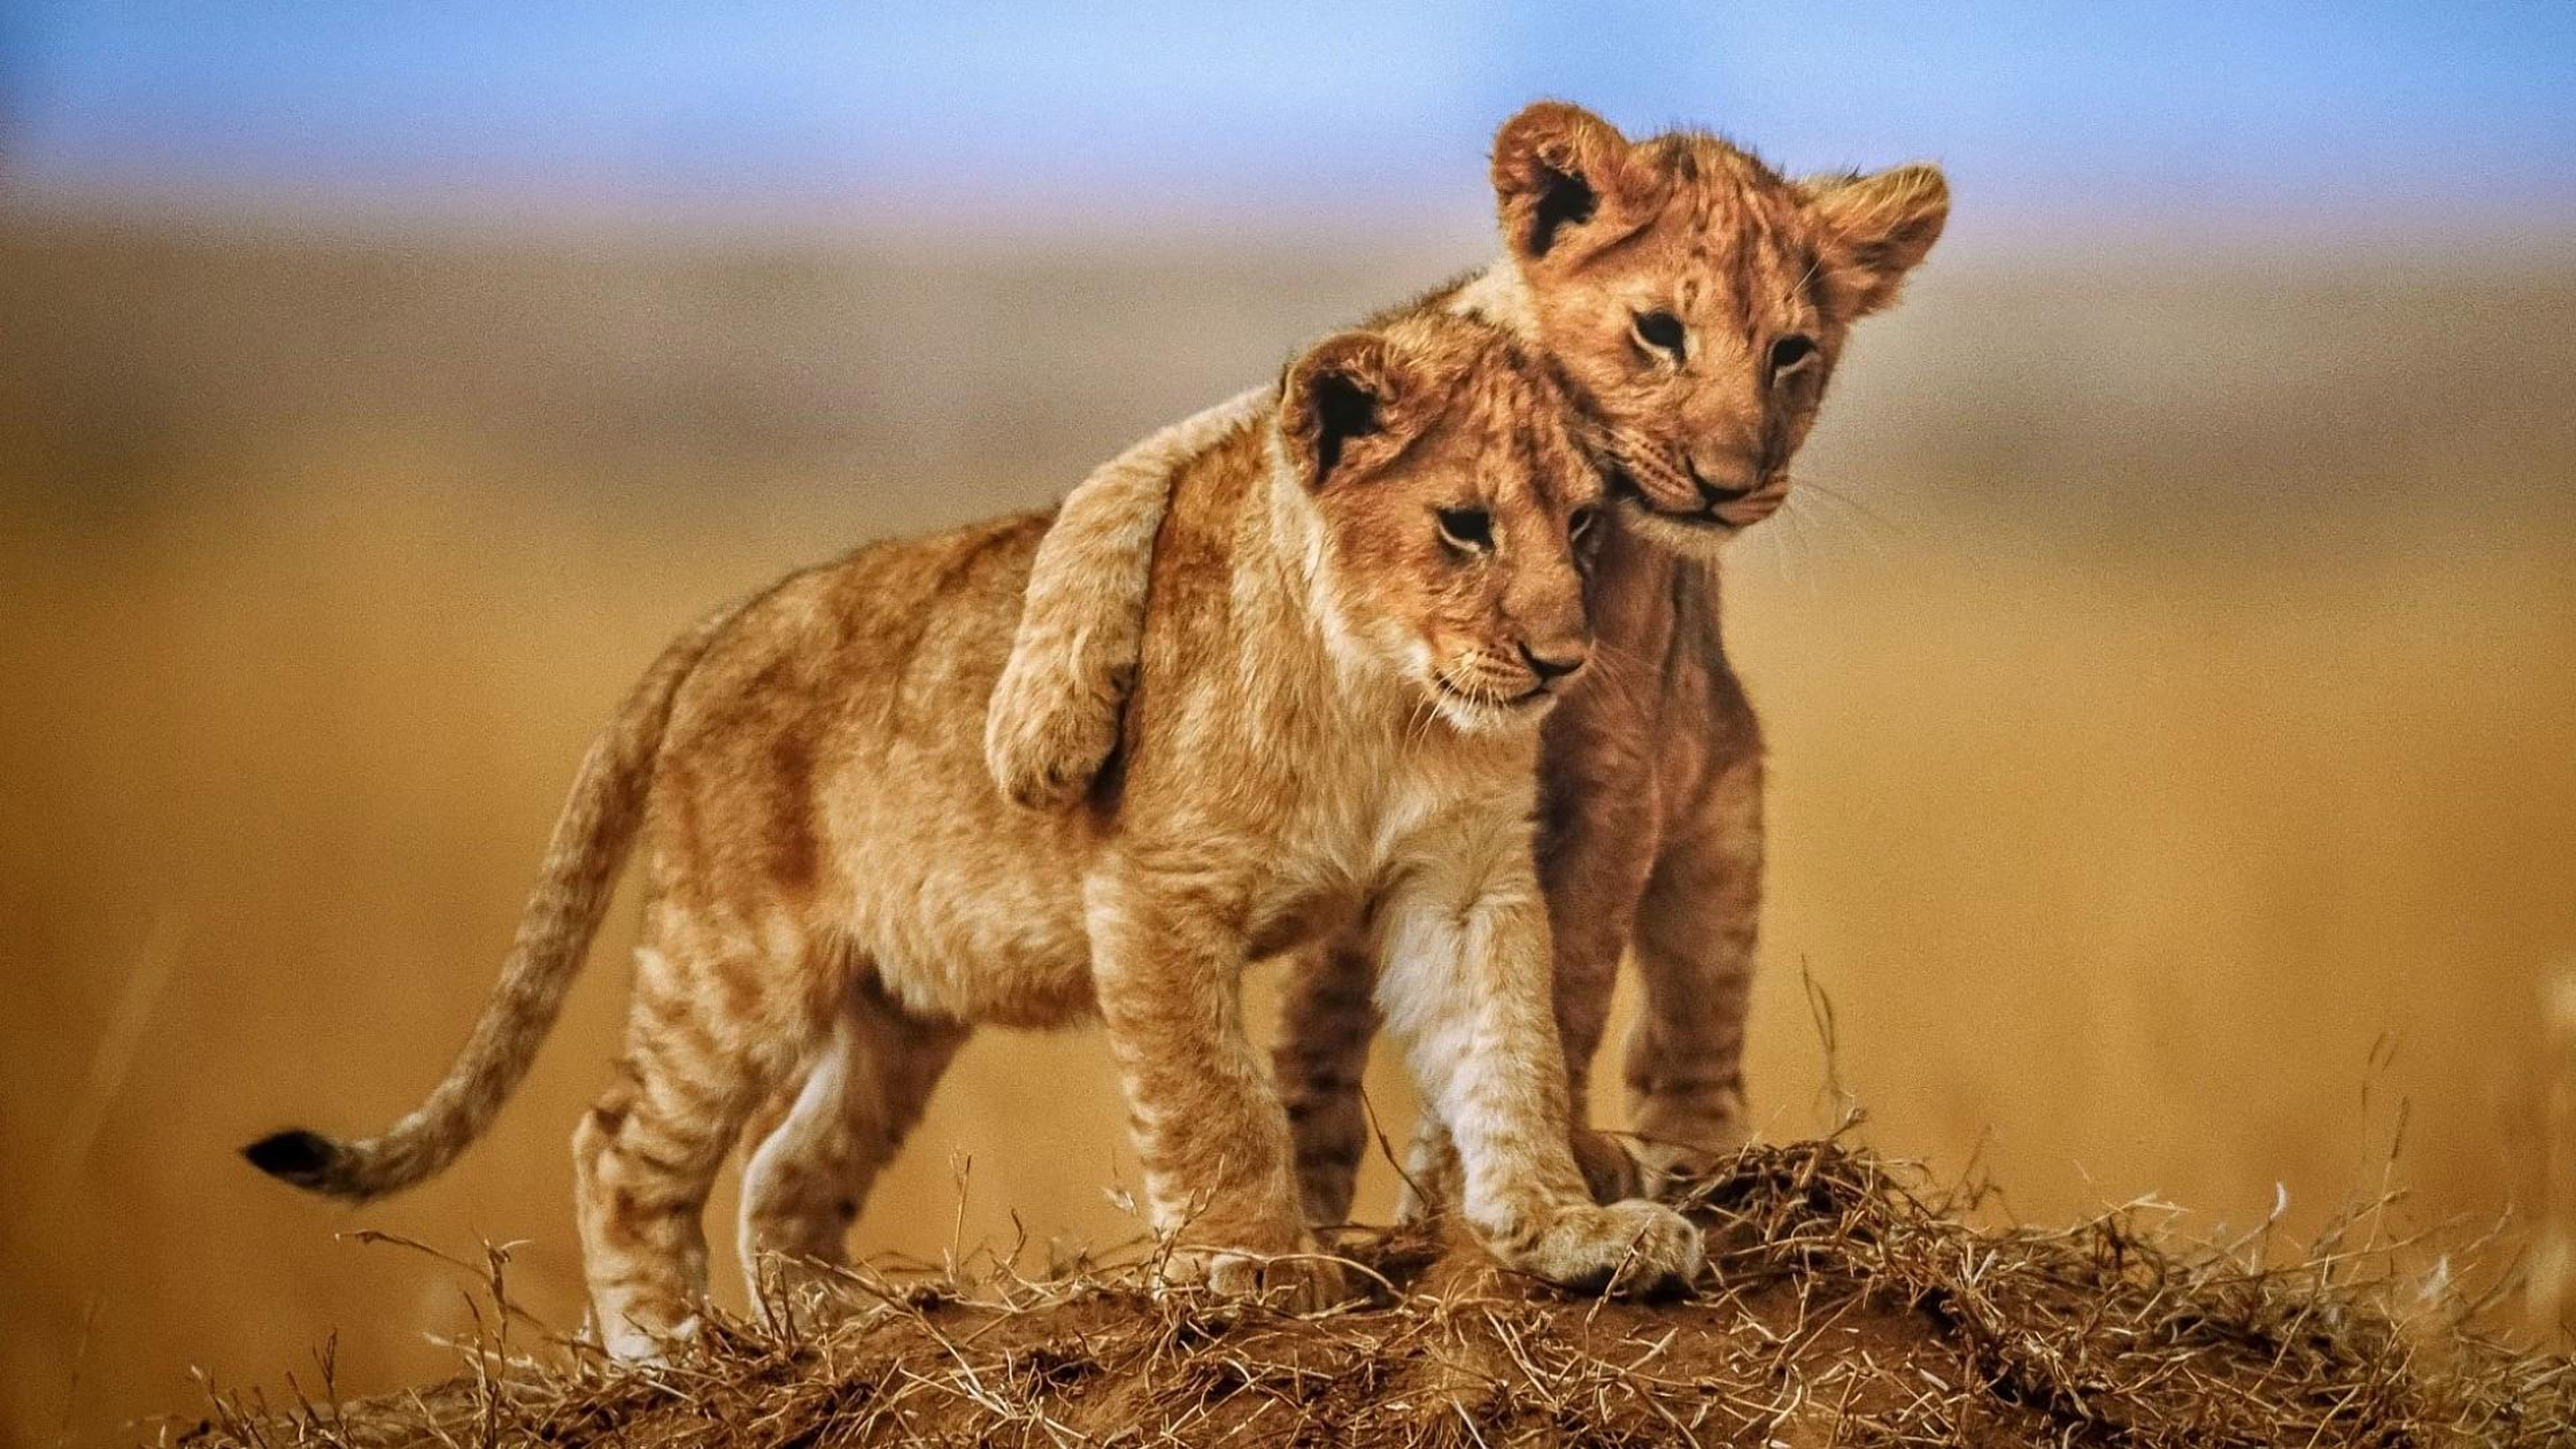 Brotherly Love Lion Cubs Photo Animals From Savannah Desktop Hd Wallpaper  For Mobile Phones Tablet And Laptop 3840x2160 : 